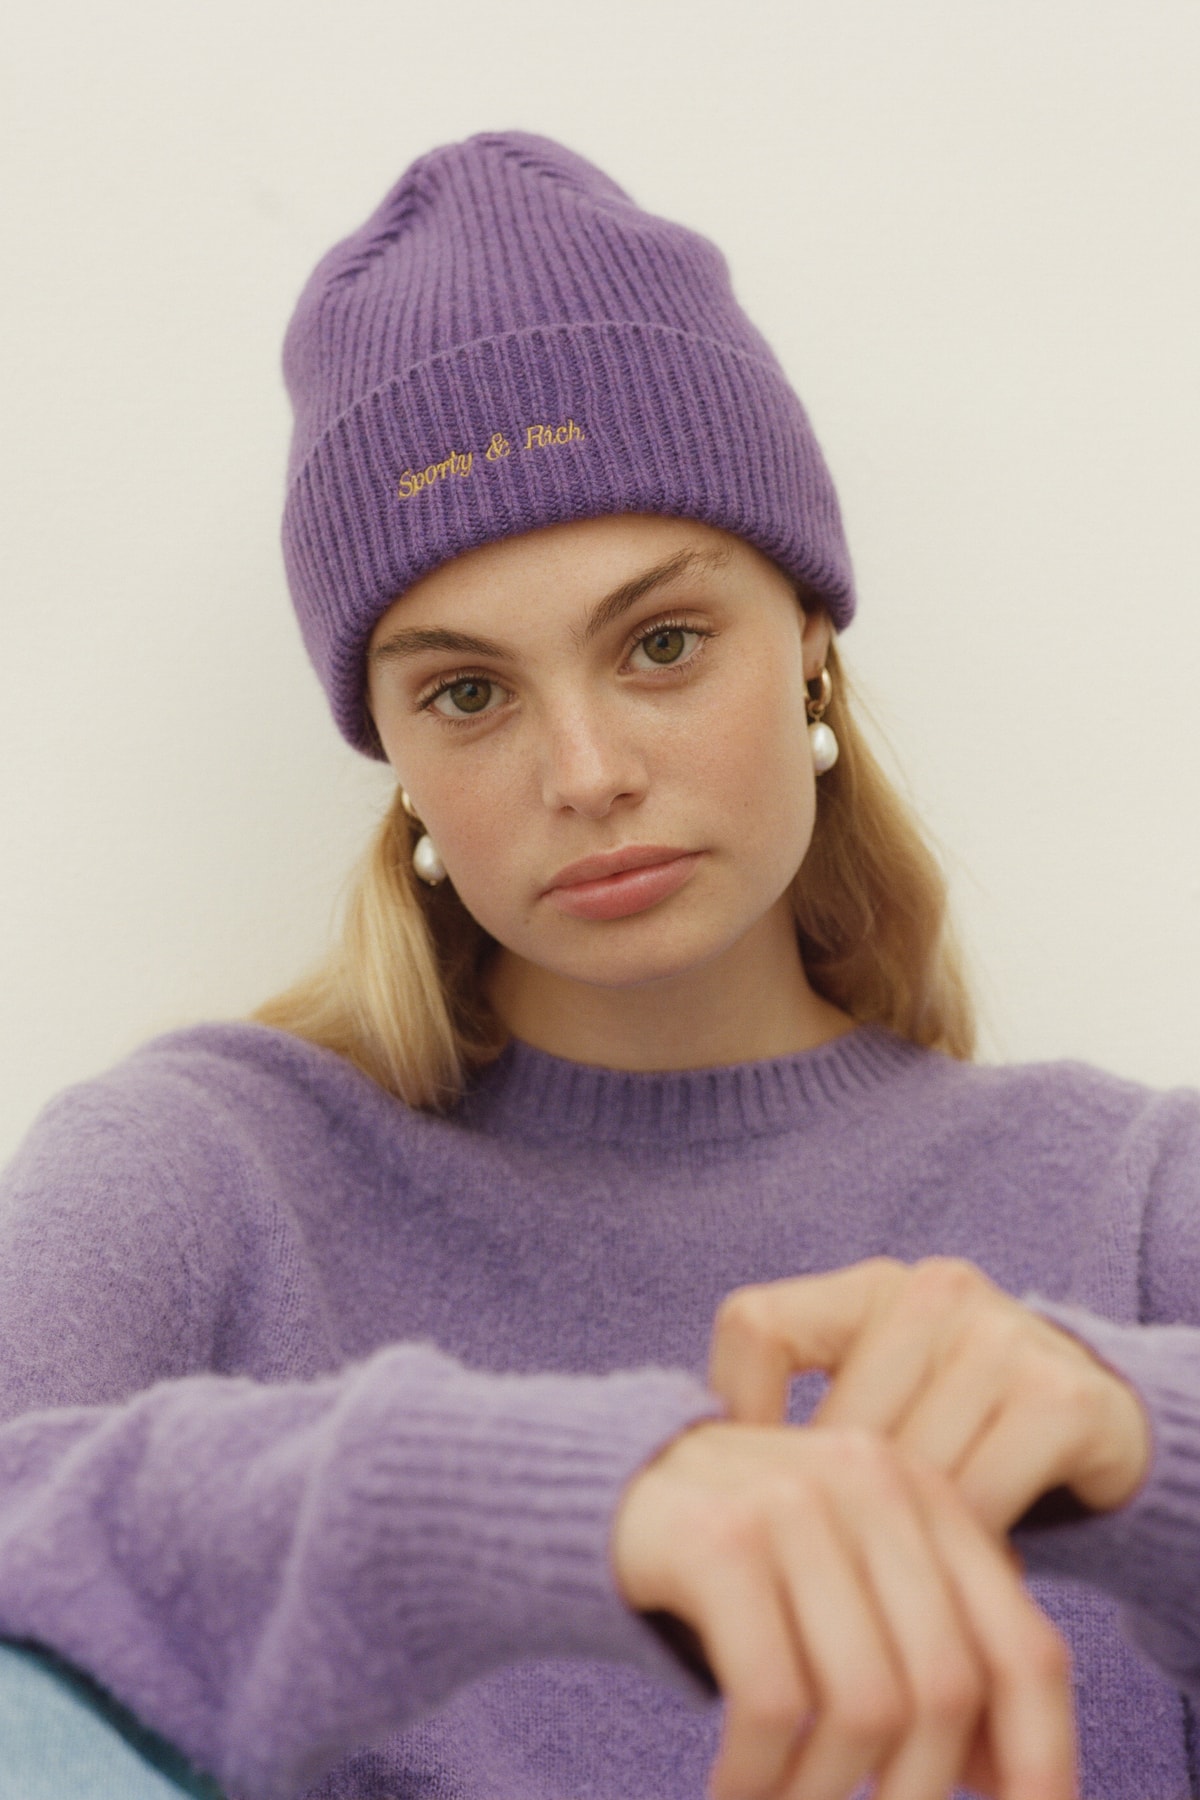 Sporty & Rich x Harmony Emily Oberg Collaboration Lookbook Collection Sweaters Logo Knits Beanie 